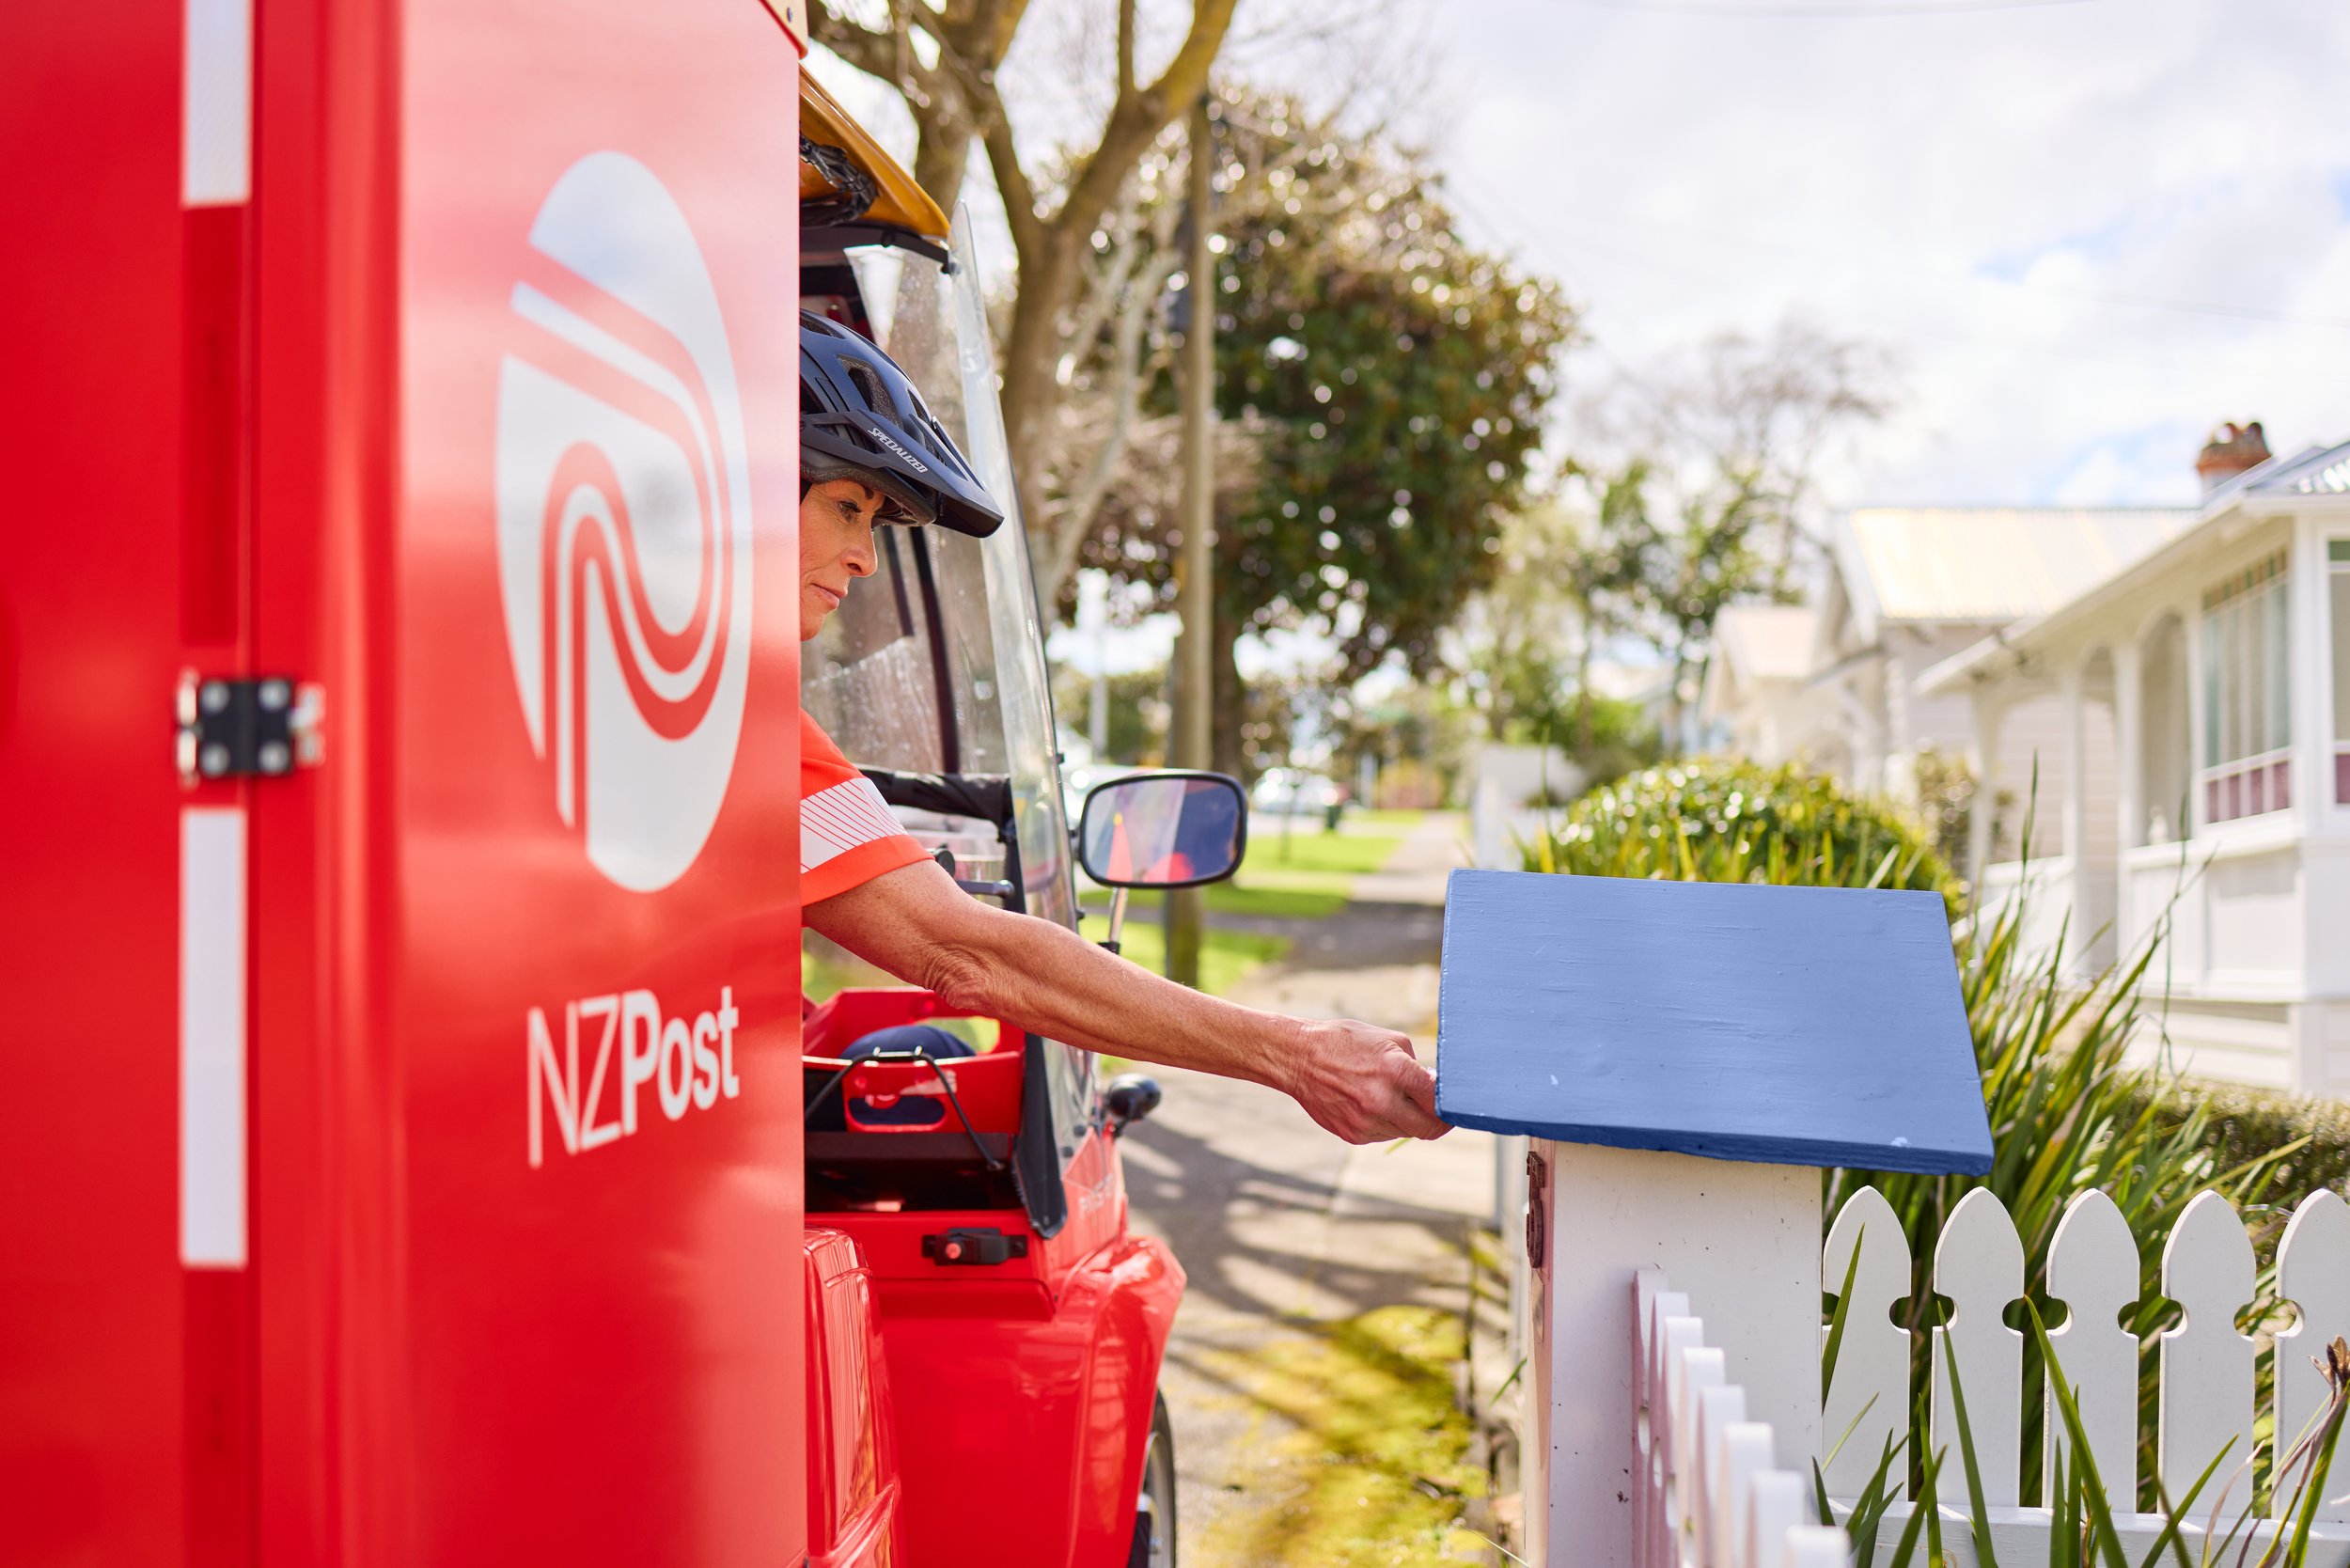 NZ Post - Consumer Delivery September 2022 (Final Selects)-34b.jpg